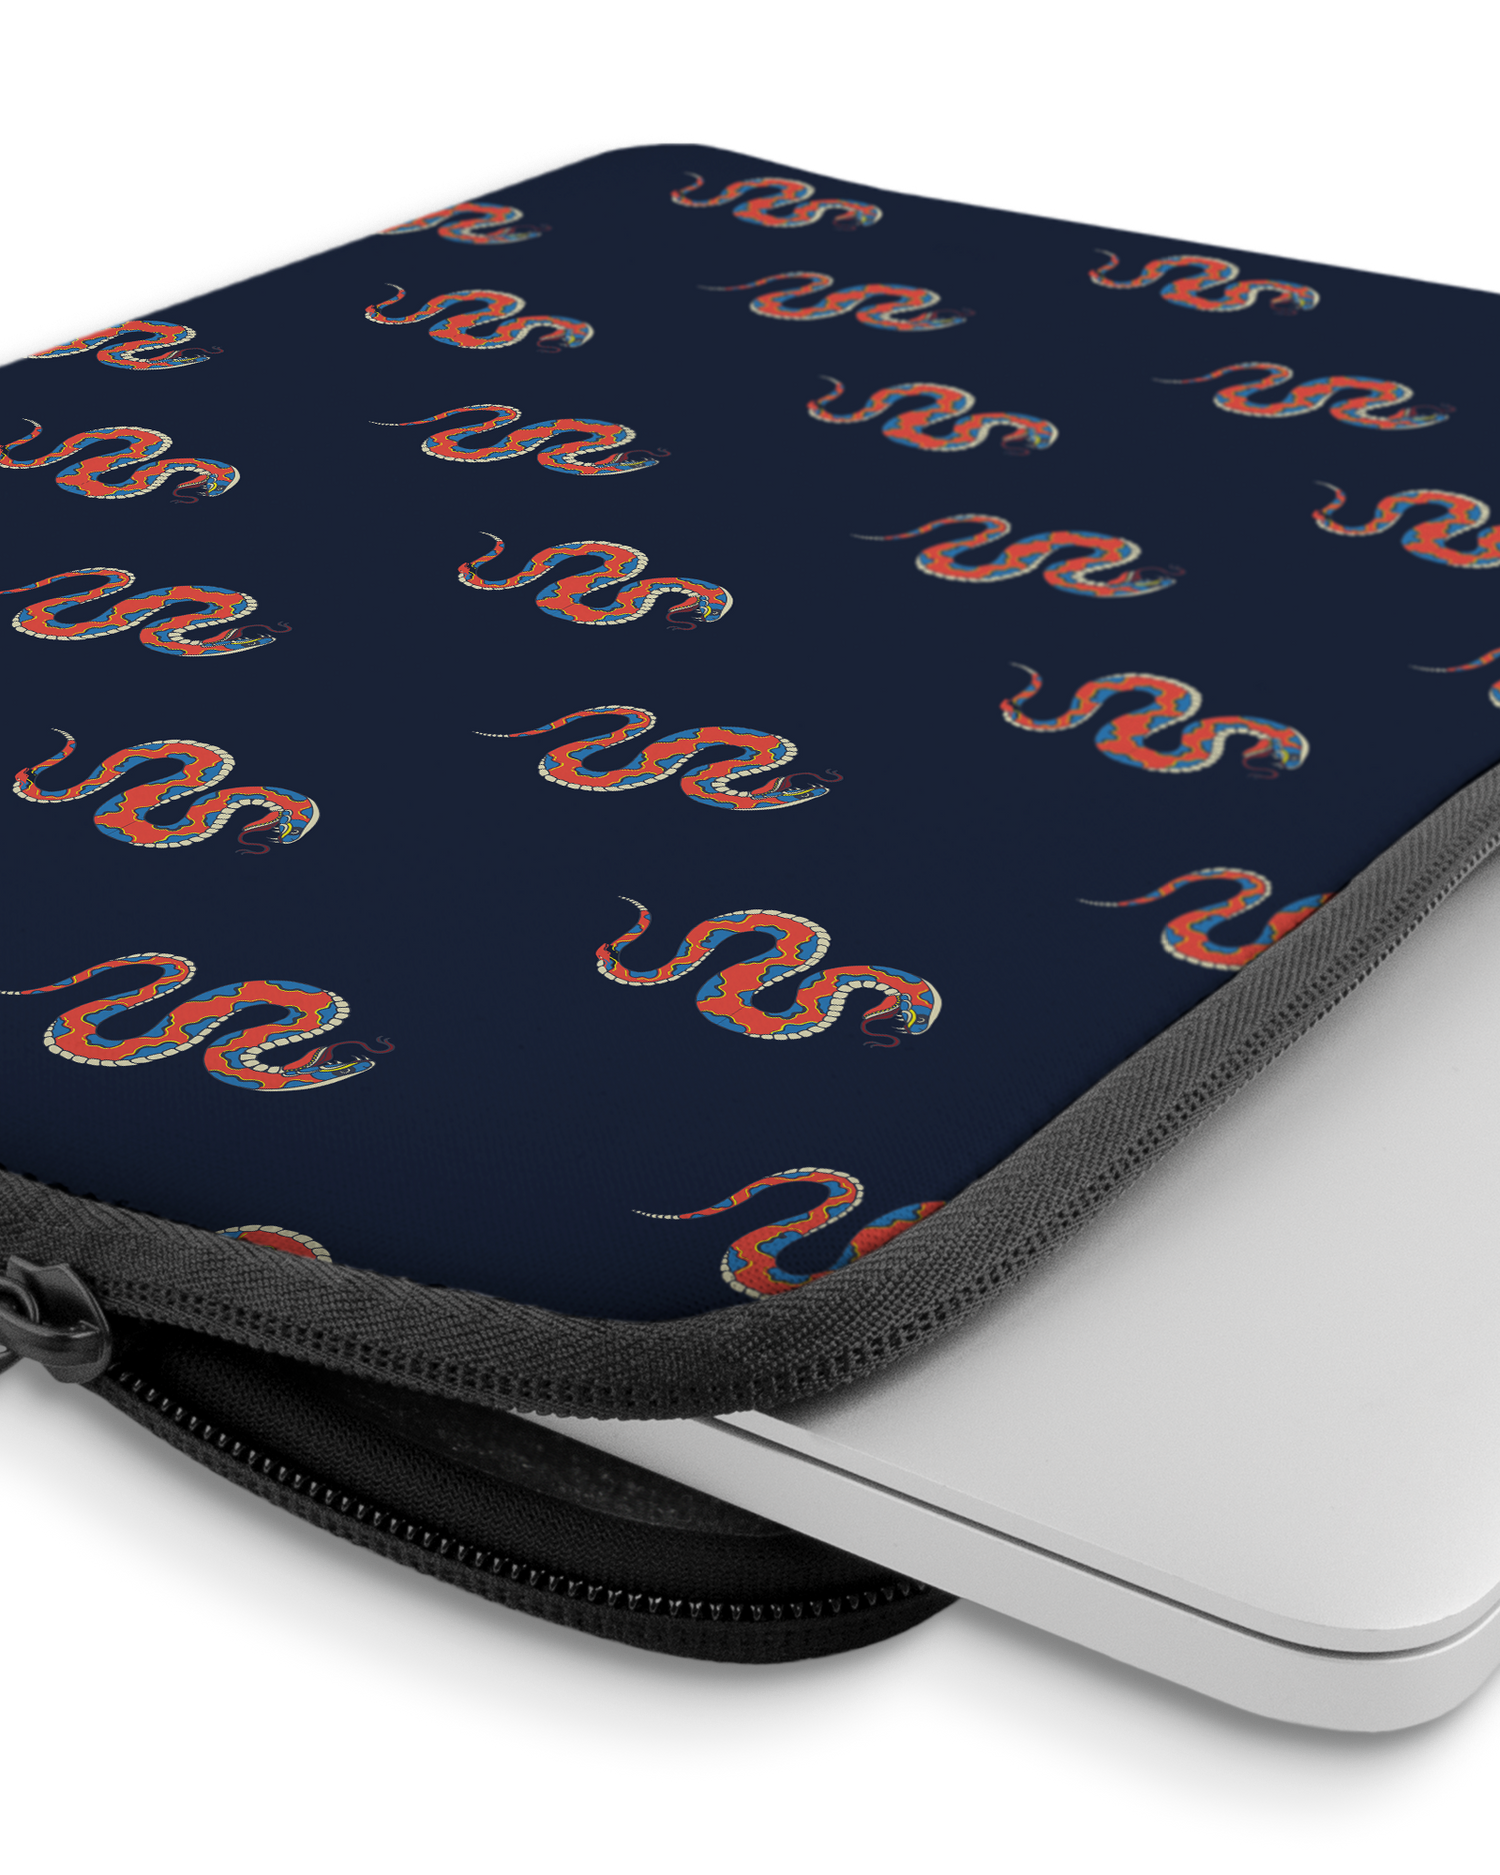 Repeating Snakes Laptop Case 13-14 inch with device inside